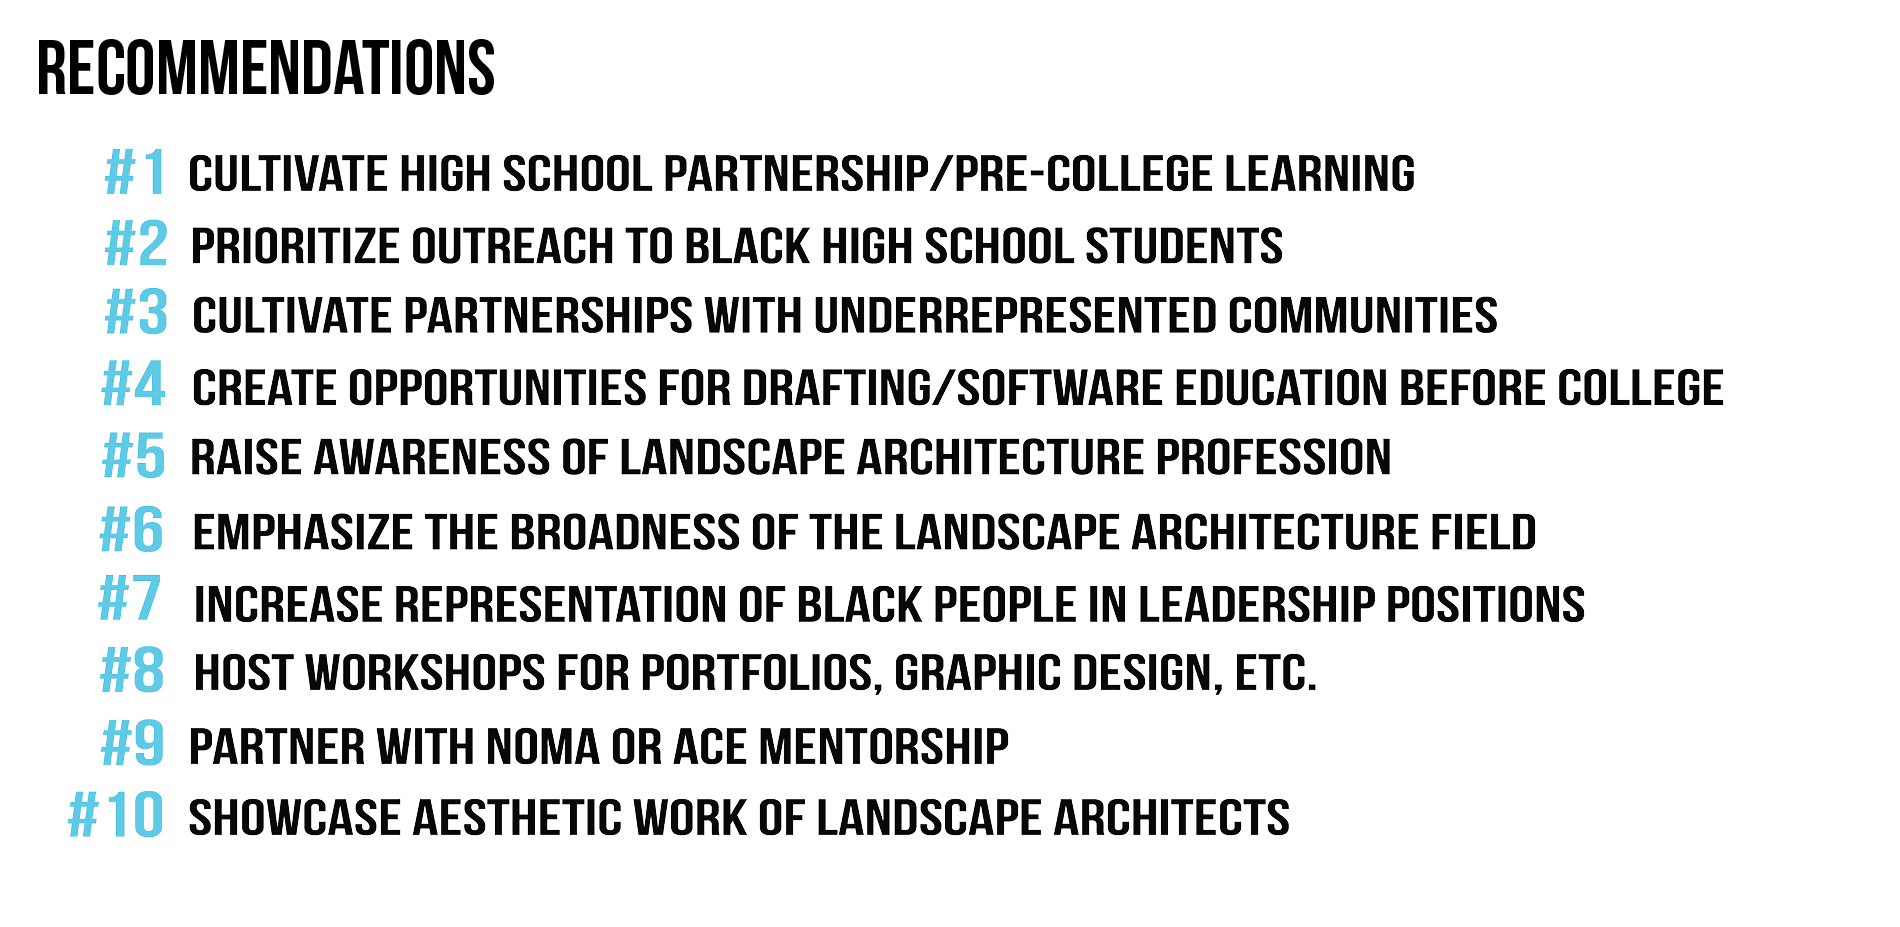 What do Black landscape architecture students recommend we do moving forward?